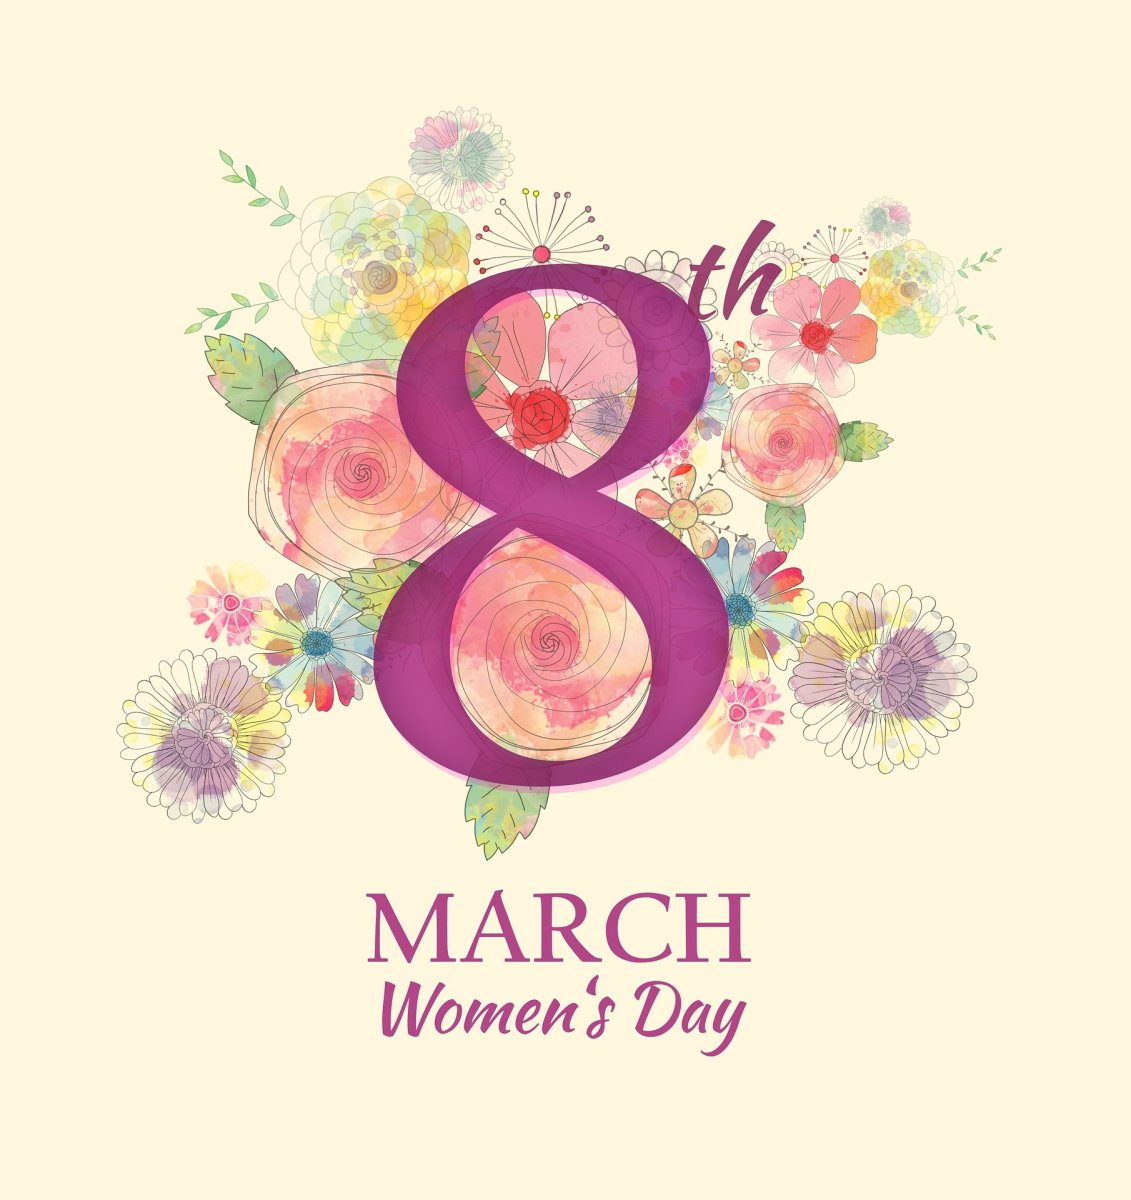 March 8 International Women’s day ultimate guide to everything